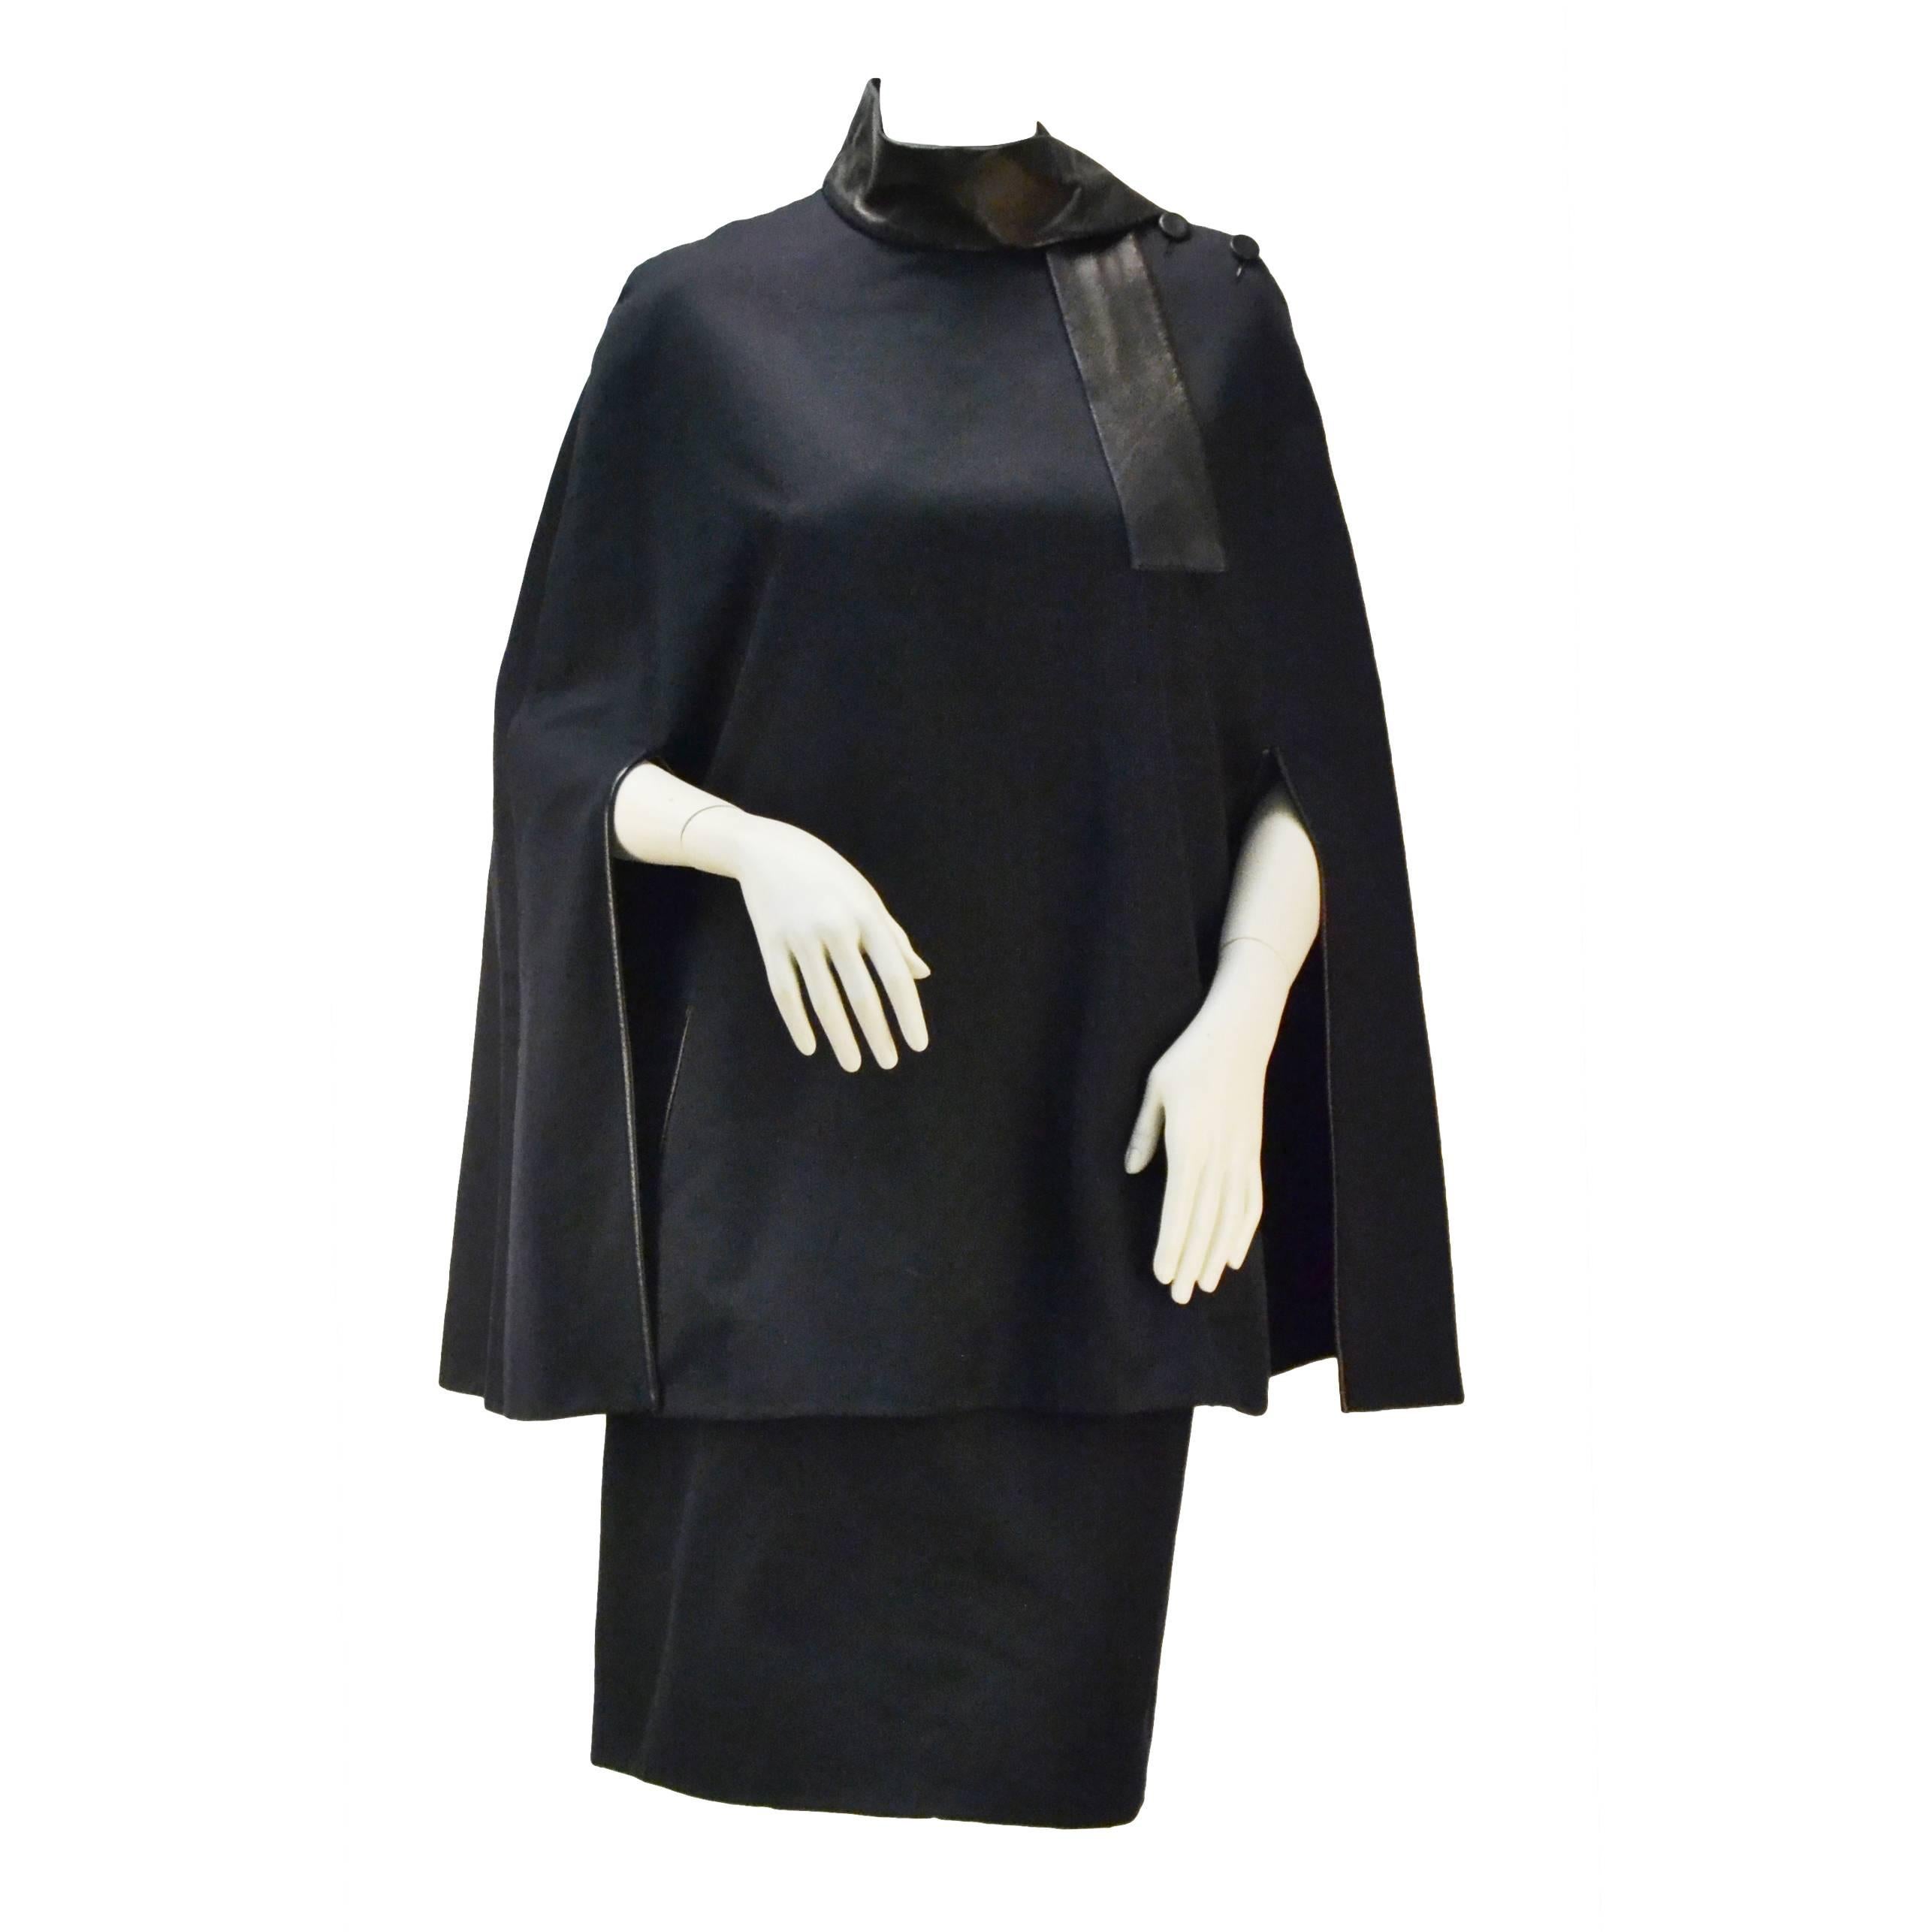 Fabulous statement cape ensemble proves Galliano's talent when he took over the helm of the coveted fashion house as its founder retired.  A Must have for any wardrobe!

This navy cape with a leather collar along the neck give a gal an image of